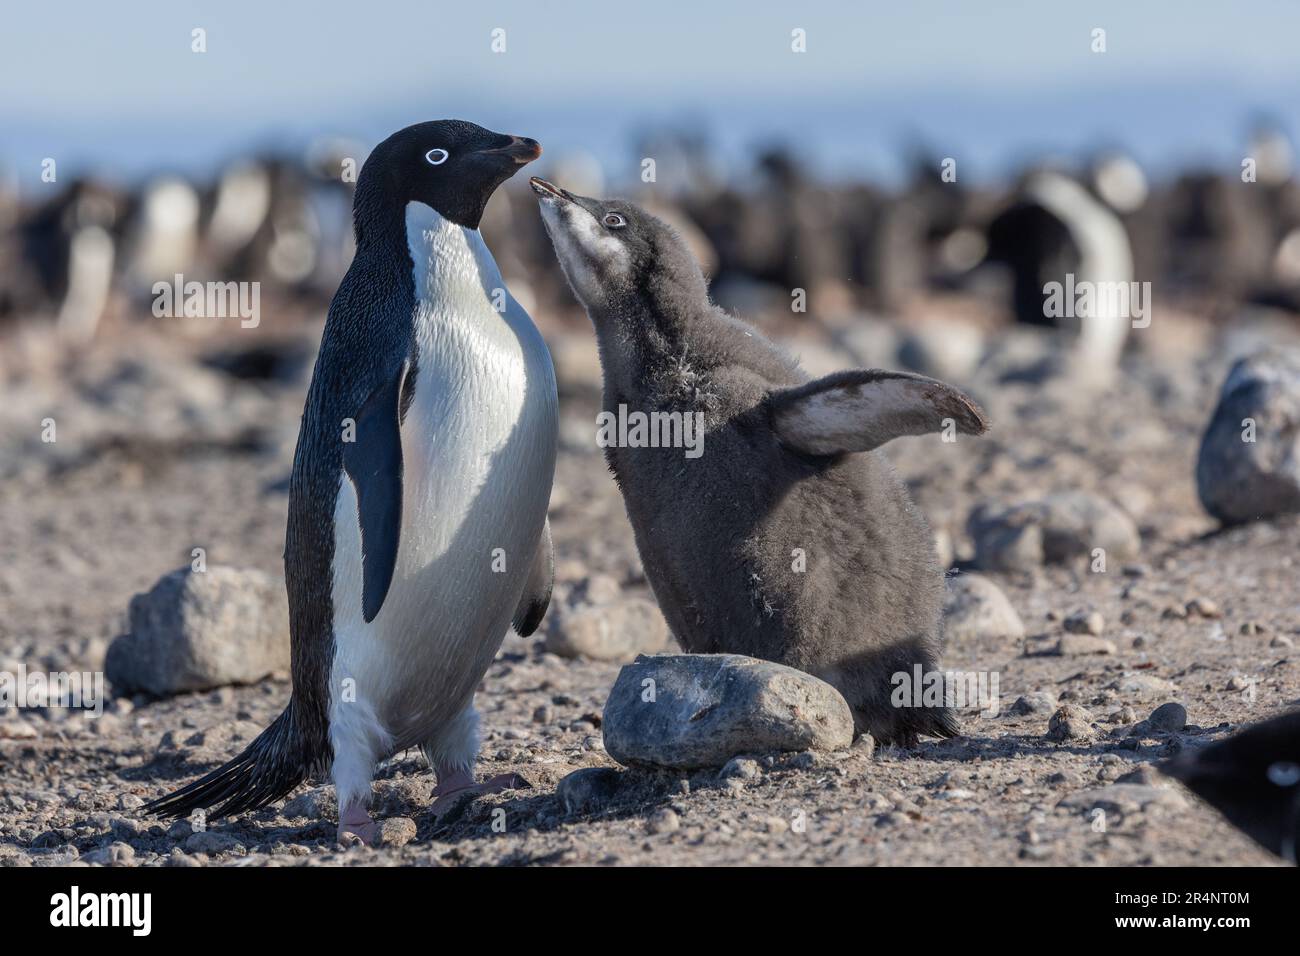 Adult Adelie Penguin with Chick at Cape Adare Rookery, Antarctica Stock Photo